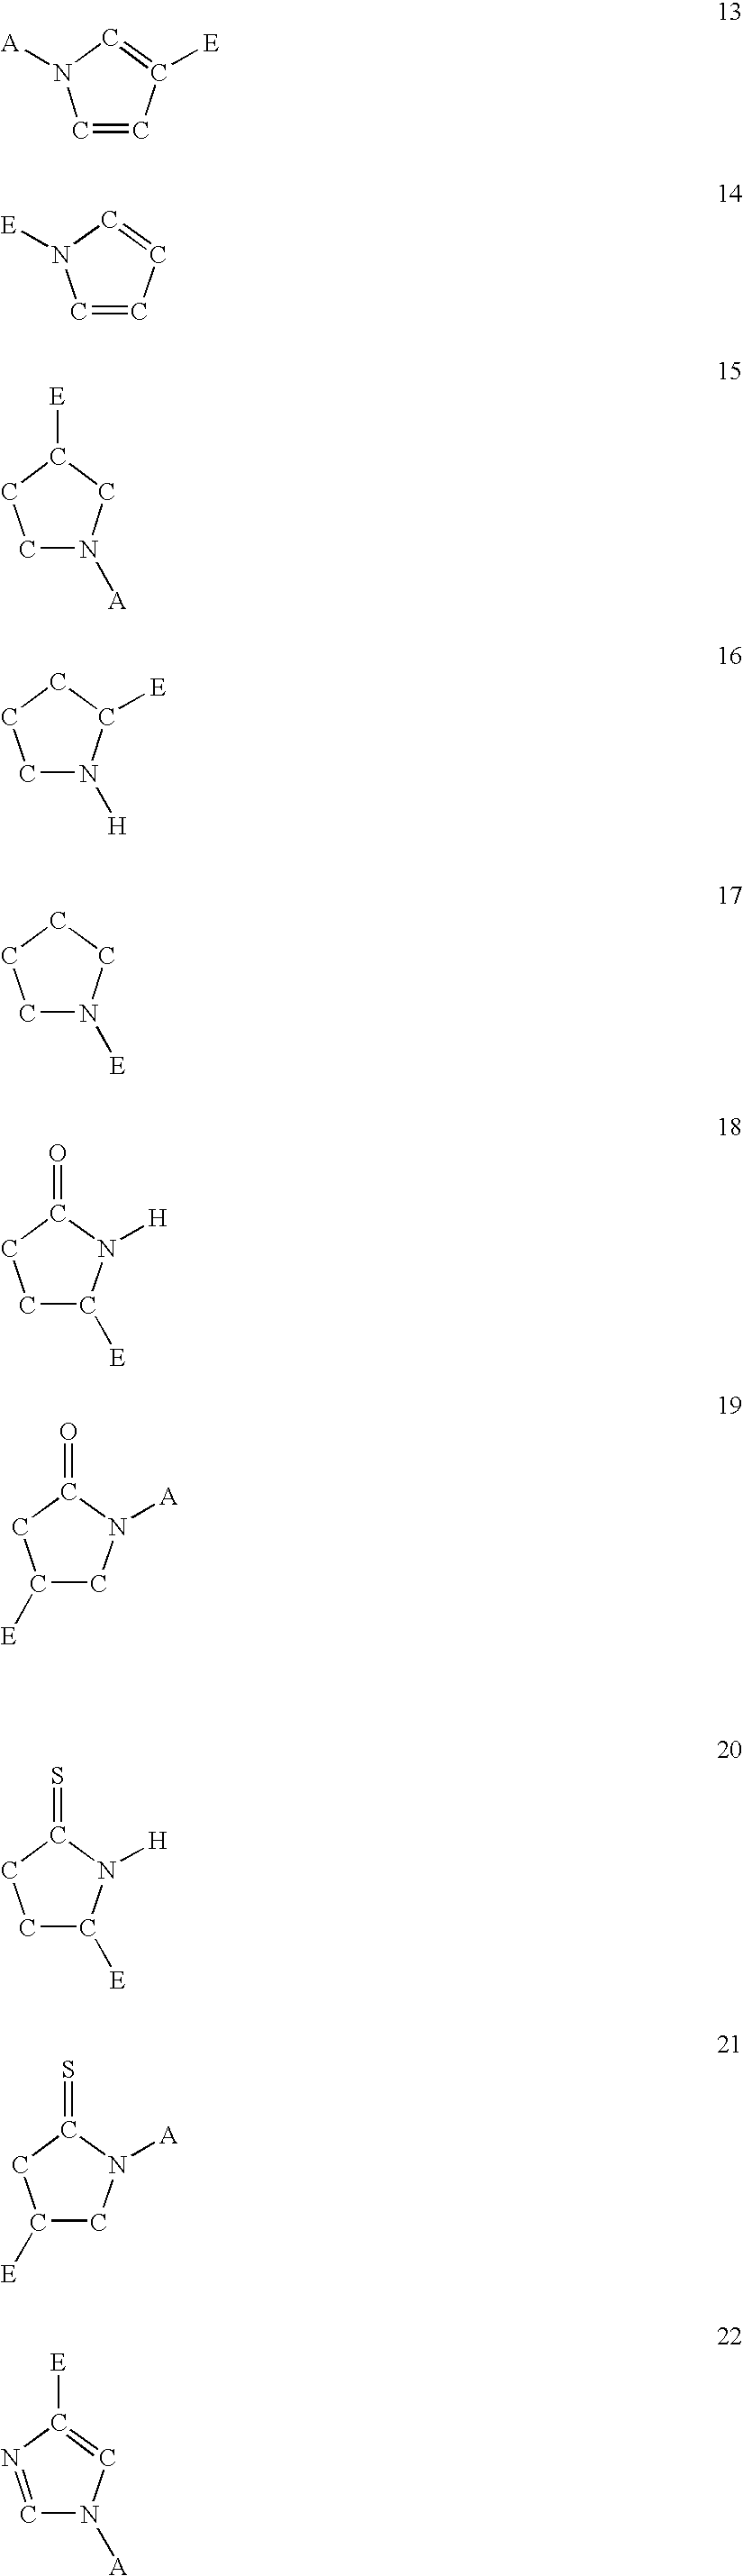 Compounds useful in the complement, coagulat and kallikrein pathways and method for their preparation